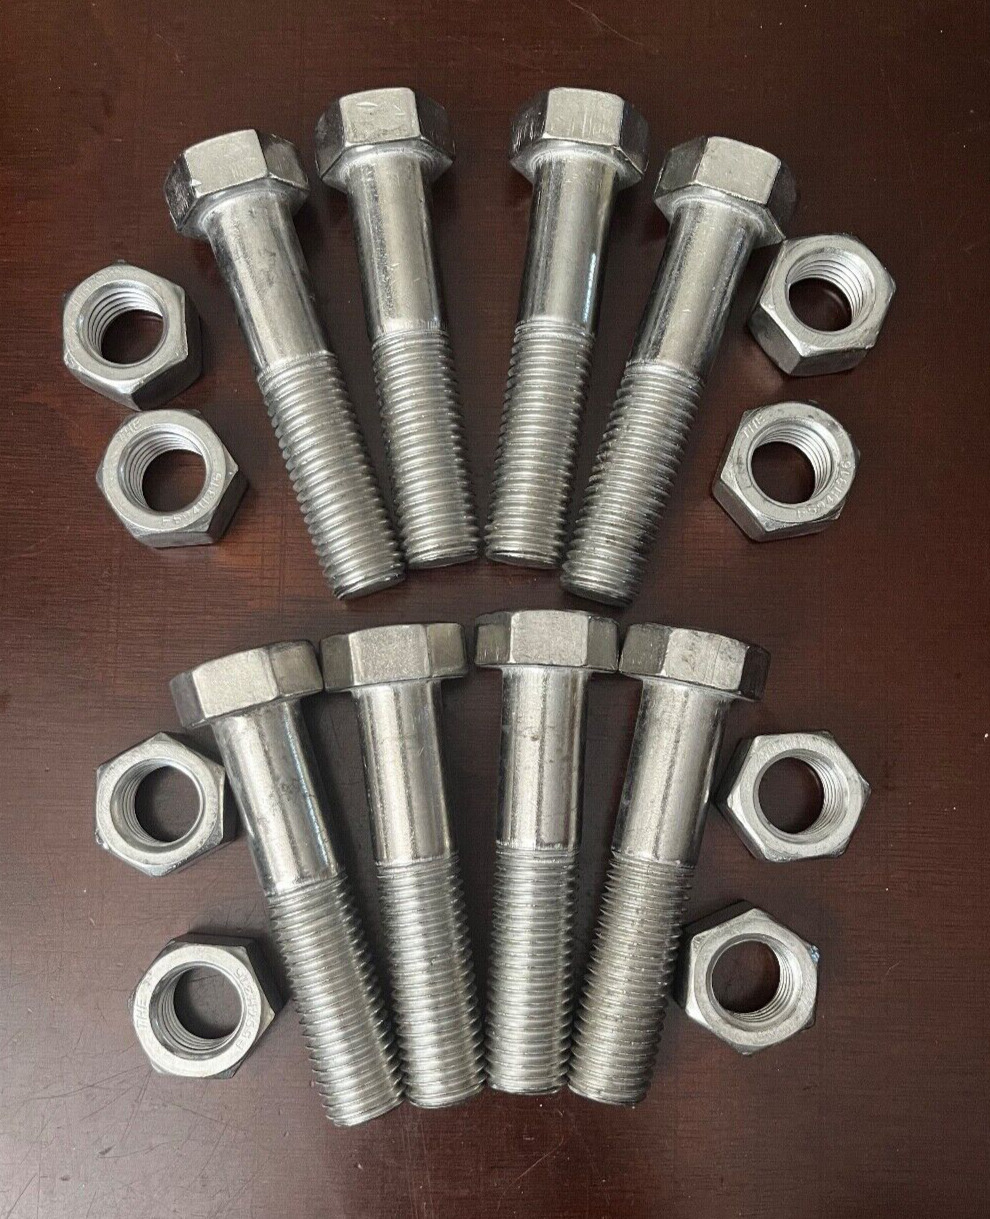 5/8-11 x 3-1/2” 316 Stainless Steel Hex Head Bolts With Nuts (8 each/16 total)